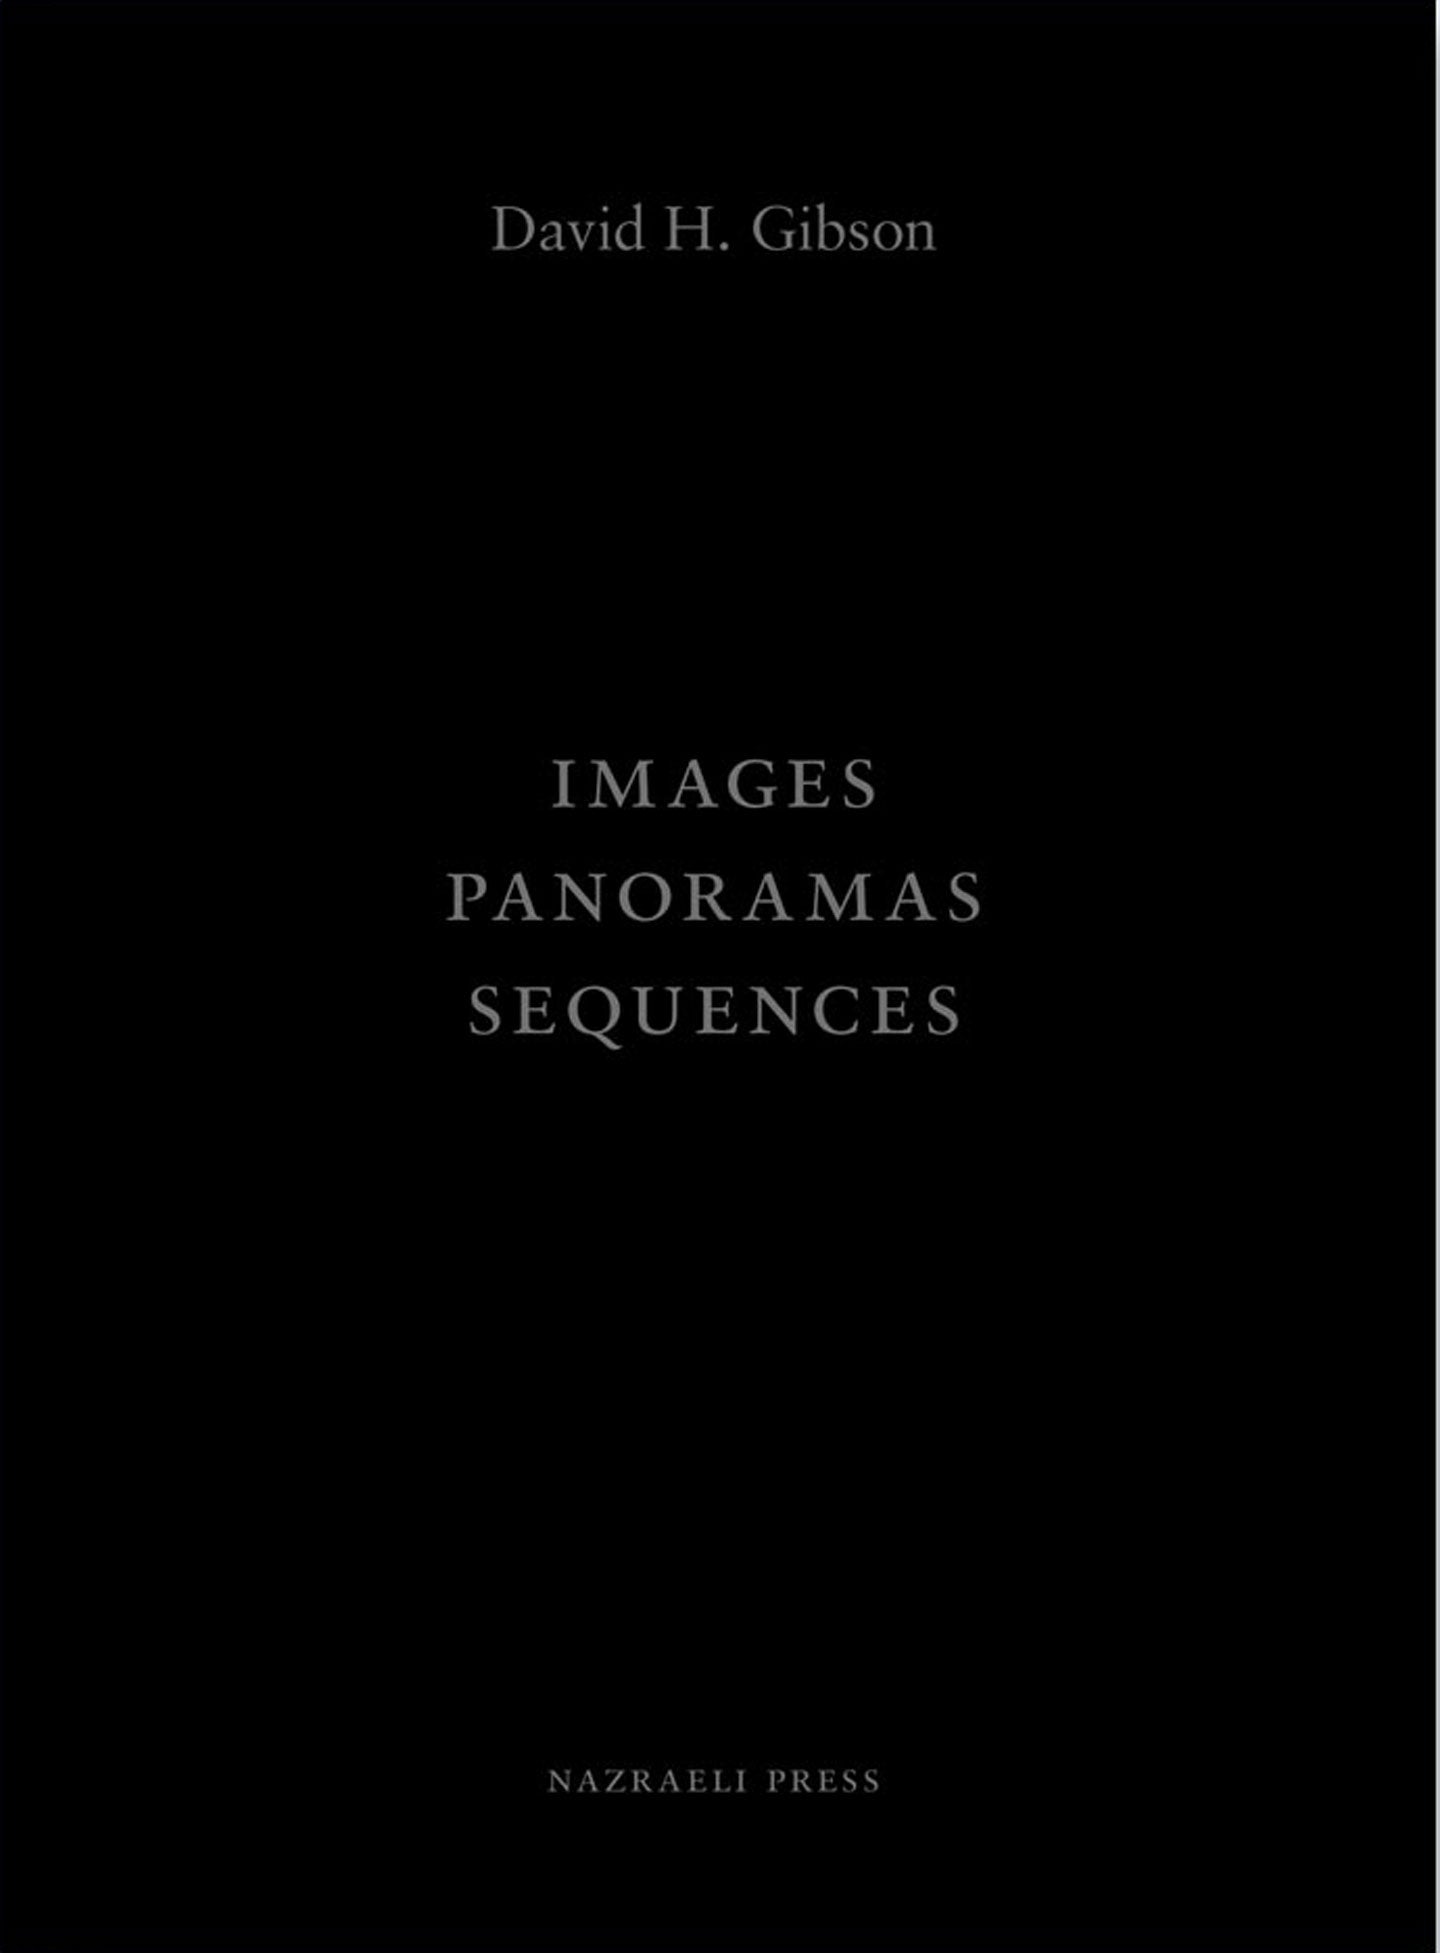 David H. Gibson: Images, Panoramas, Sequences, Limited Edition (3 Volume Set)